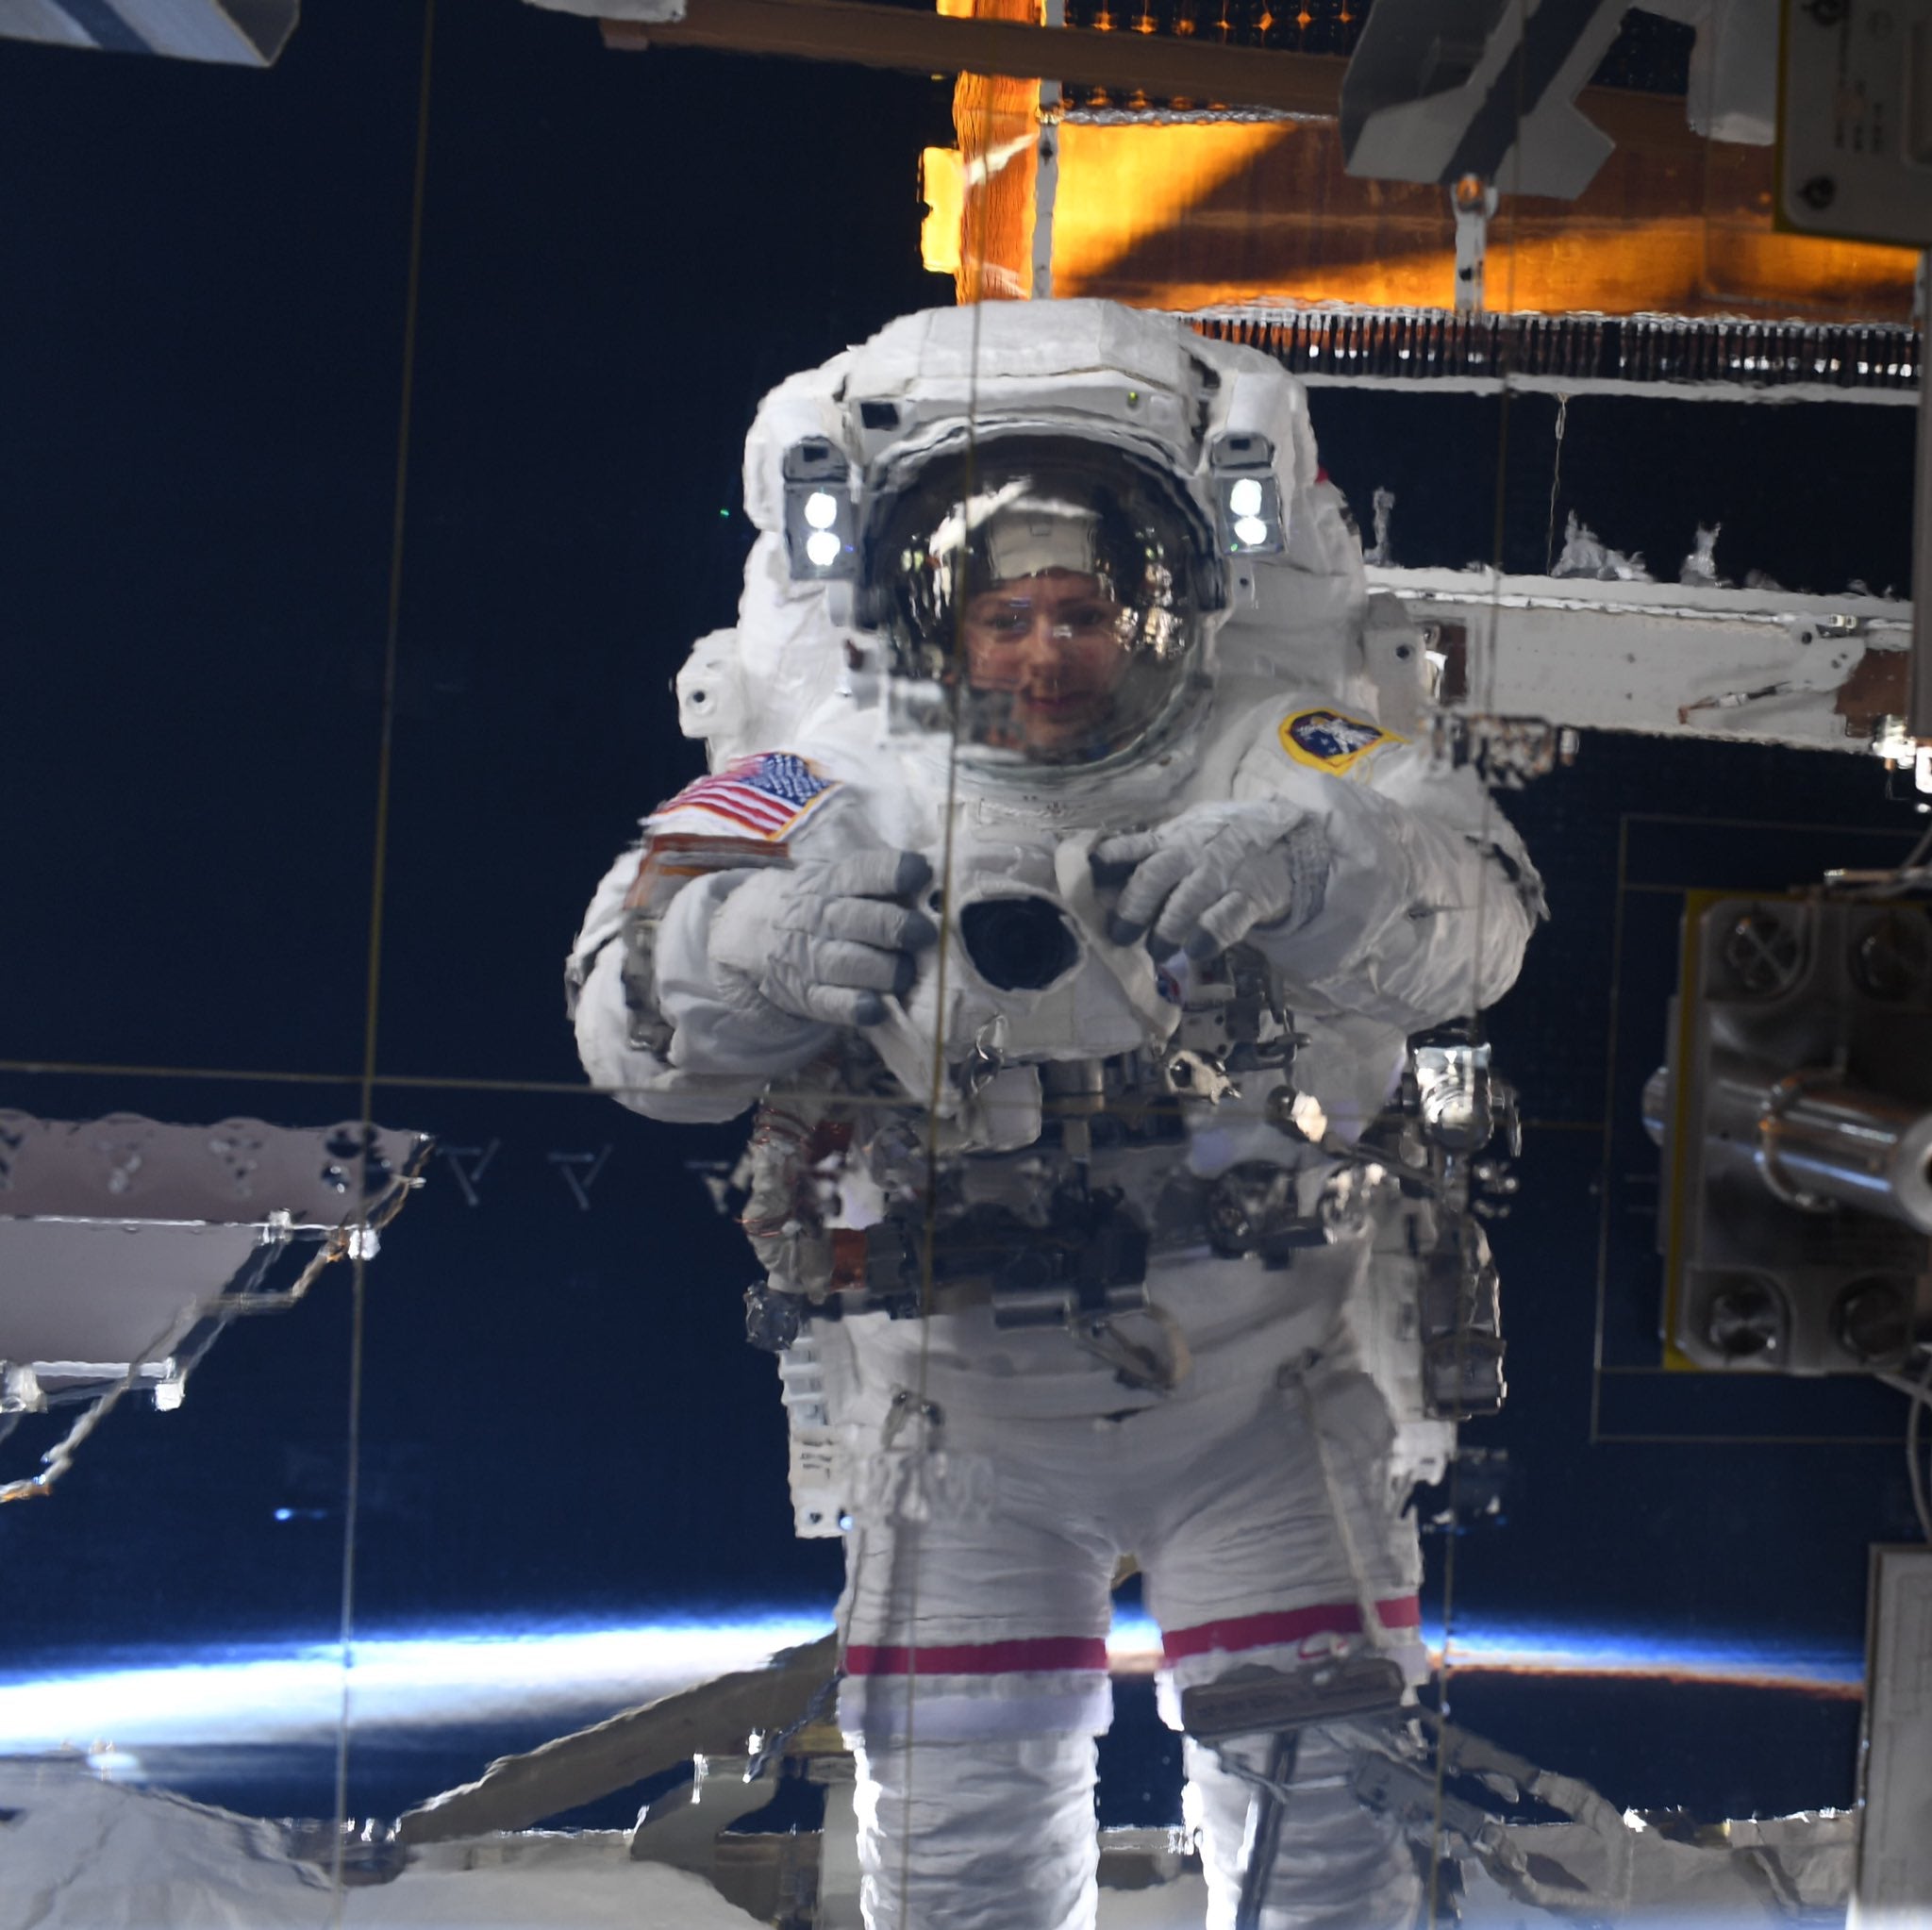 All-Female NASA Astronauts conducted a spacewalk to upgrade a Space Station's power system